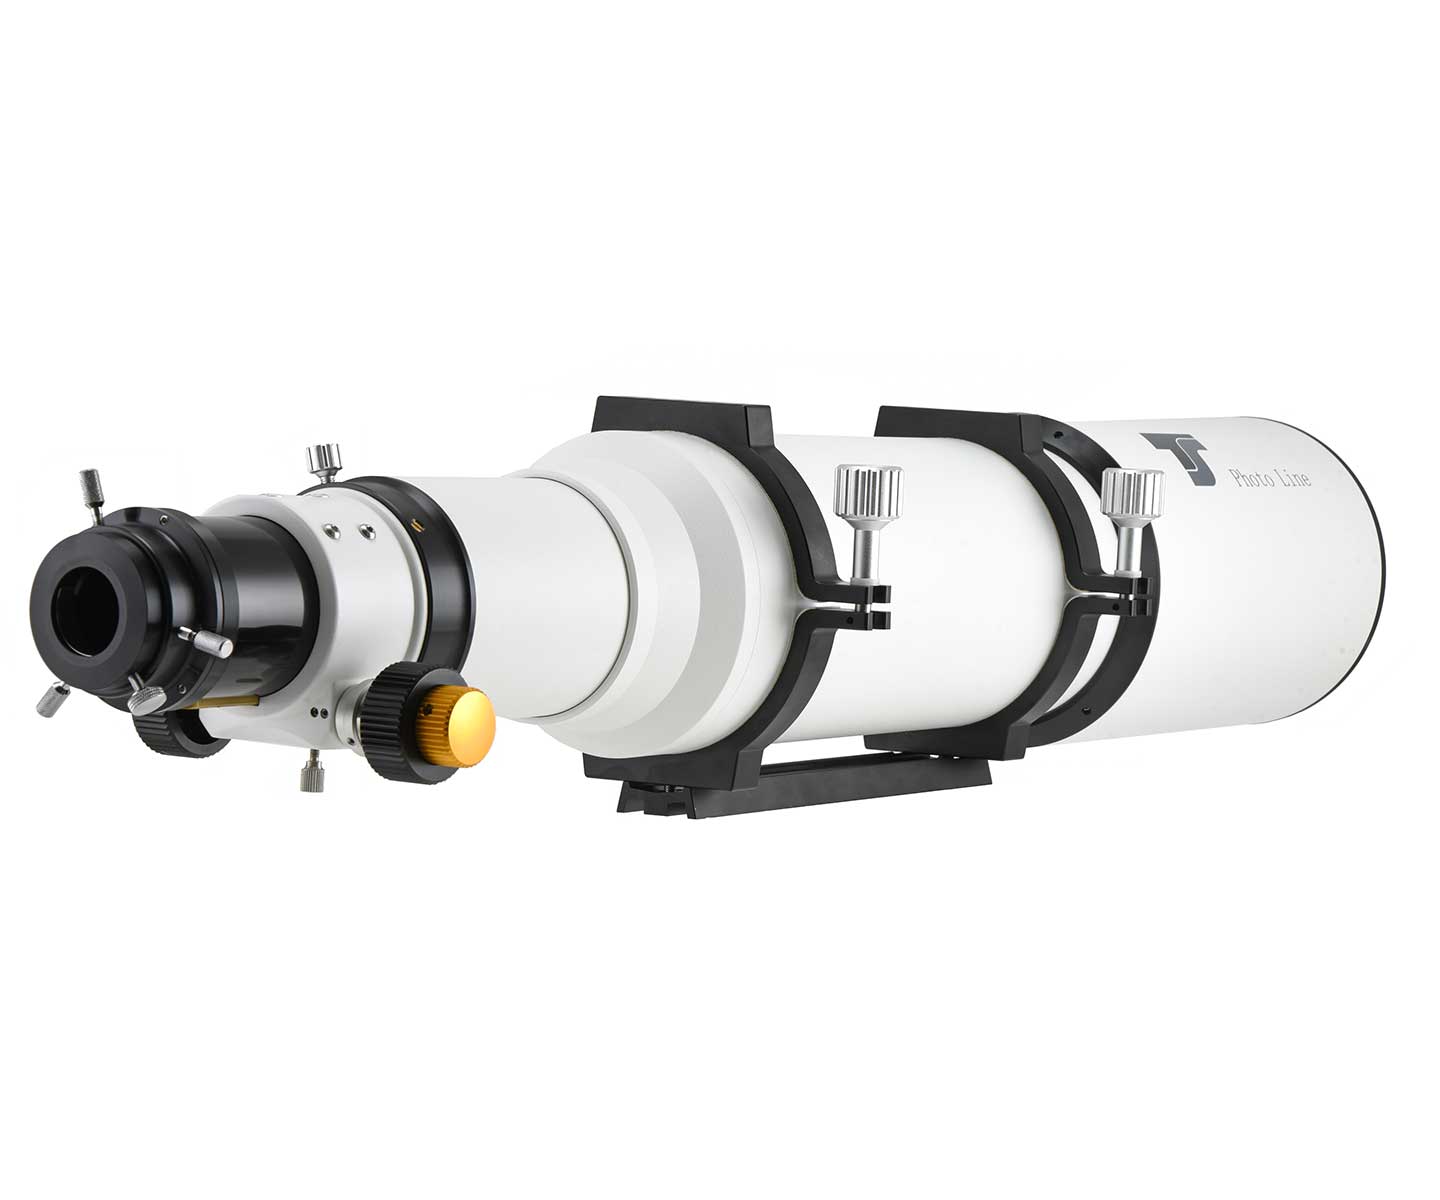  The apochromatic refractor with 130 mm aperture and 910 mm focal length offers a good correcture of chromatic aberration [EN] 